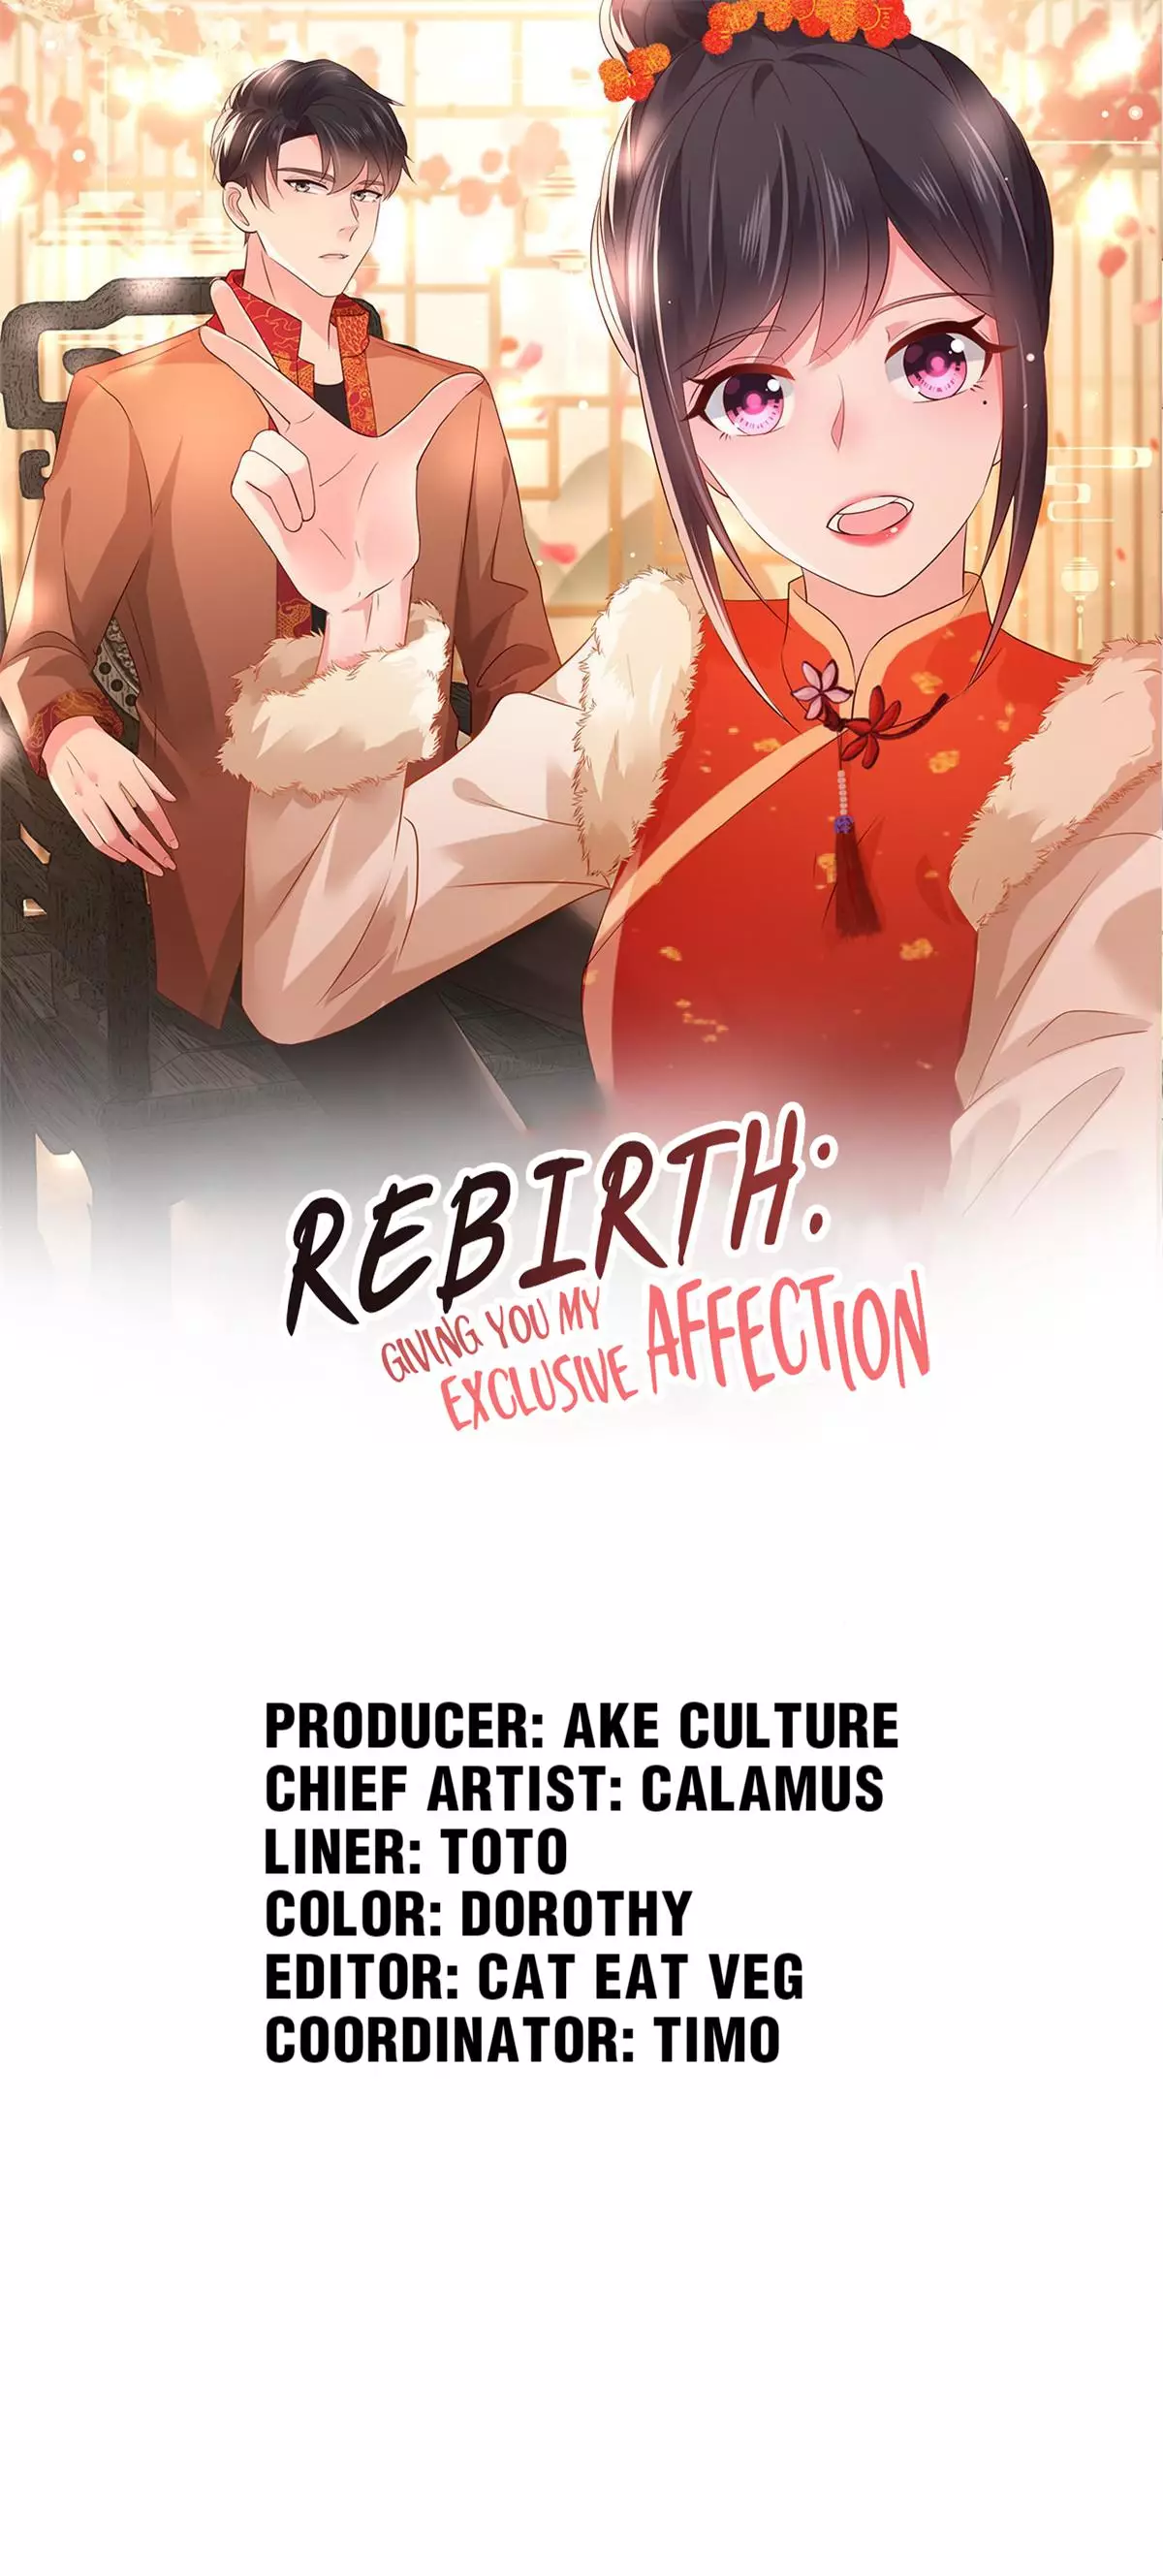 Rebirth: Giving You My Exclusive Affection - 60 page 1-bccb7ead